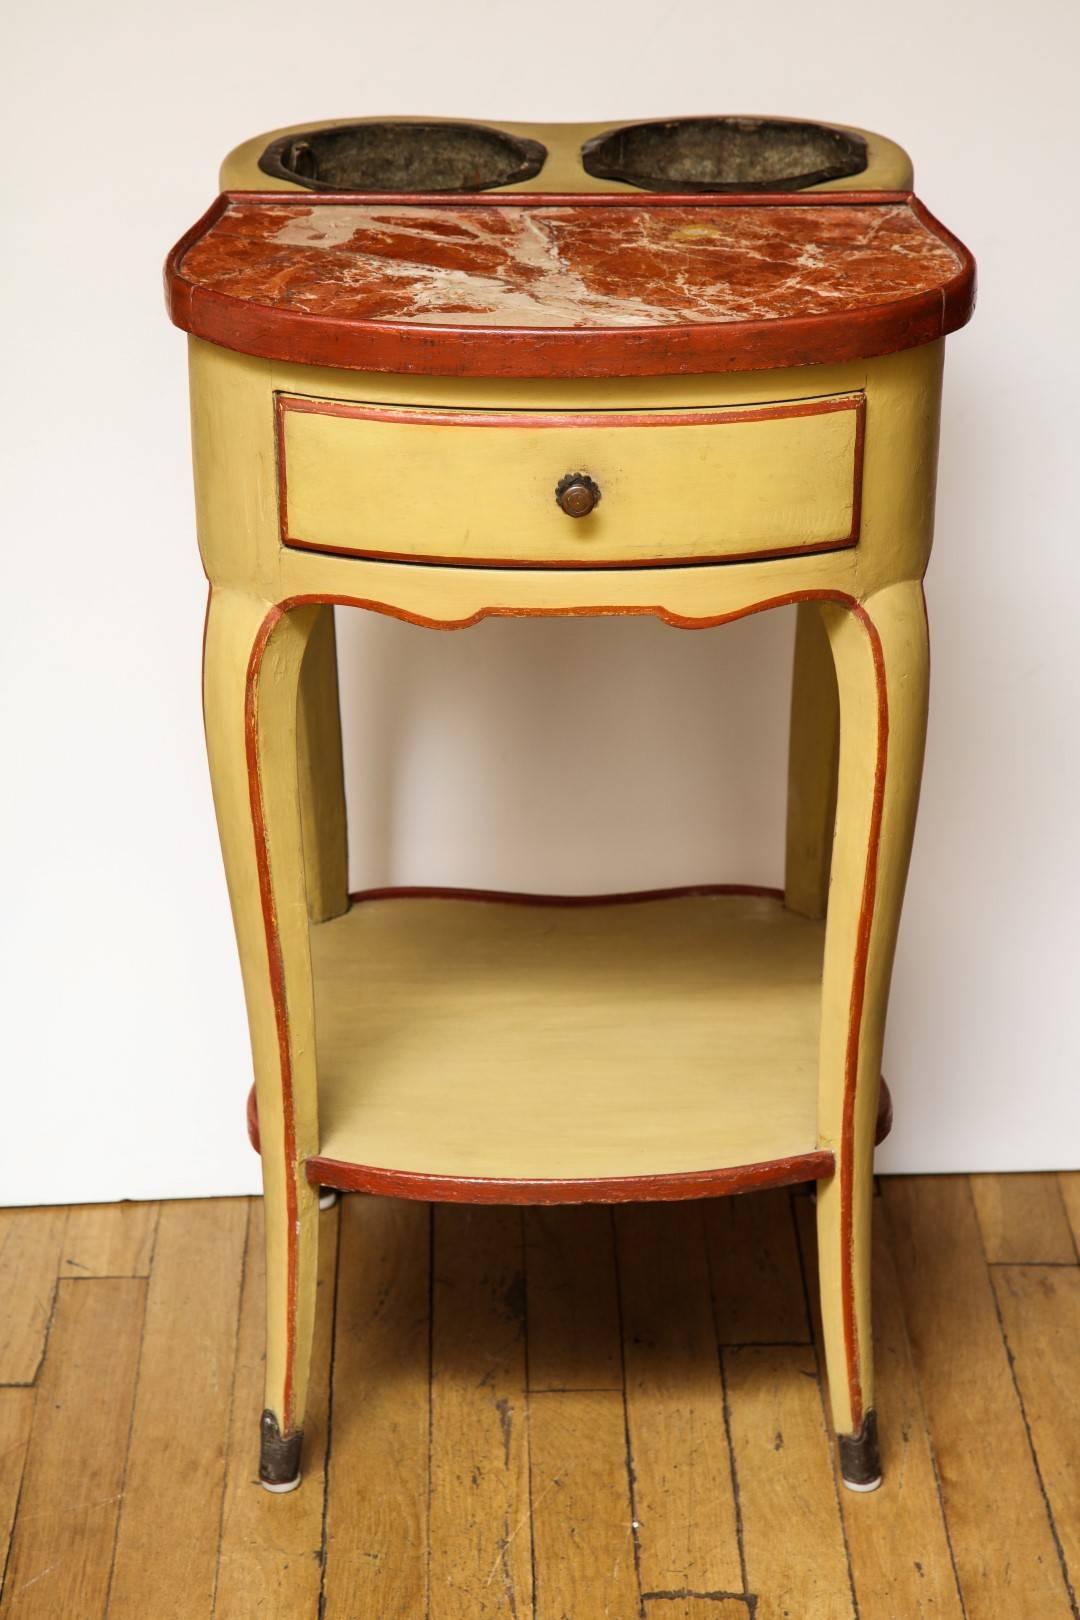 A Louis XV style rafraichissoir, the top fitted with a rouge marble tablet and two oval metal receptacles, above a scalloped apron with a drawer, the four slight cabriole legs terminating in sabots and joined by an under-tier, circa 1890. The